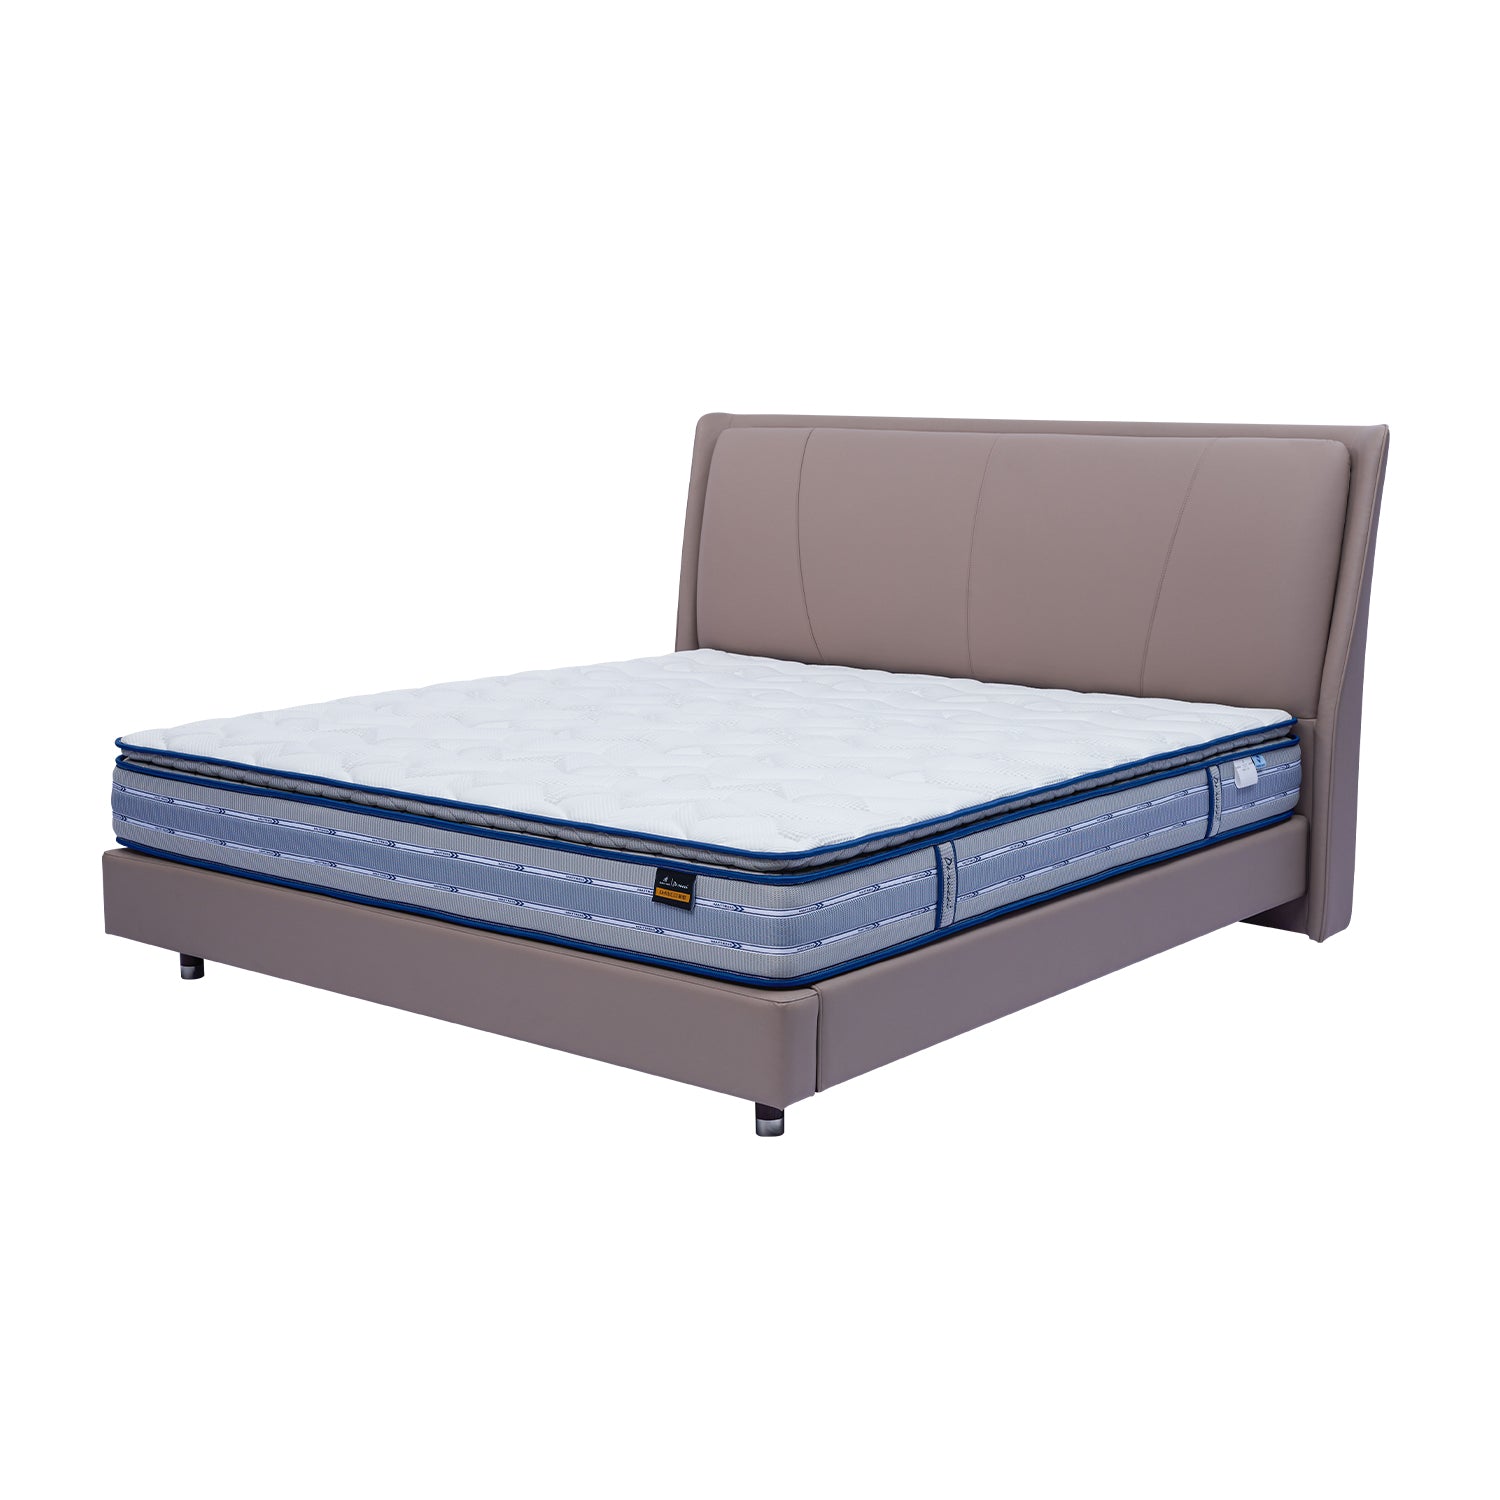 DeRUCCI Bed Frame BOC1 - 018 with gray upholstered headboard and white mattress featuring a blue border, showcasing modern, sturdy design and high-quality craftsmanship.